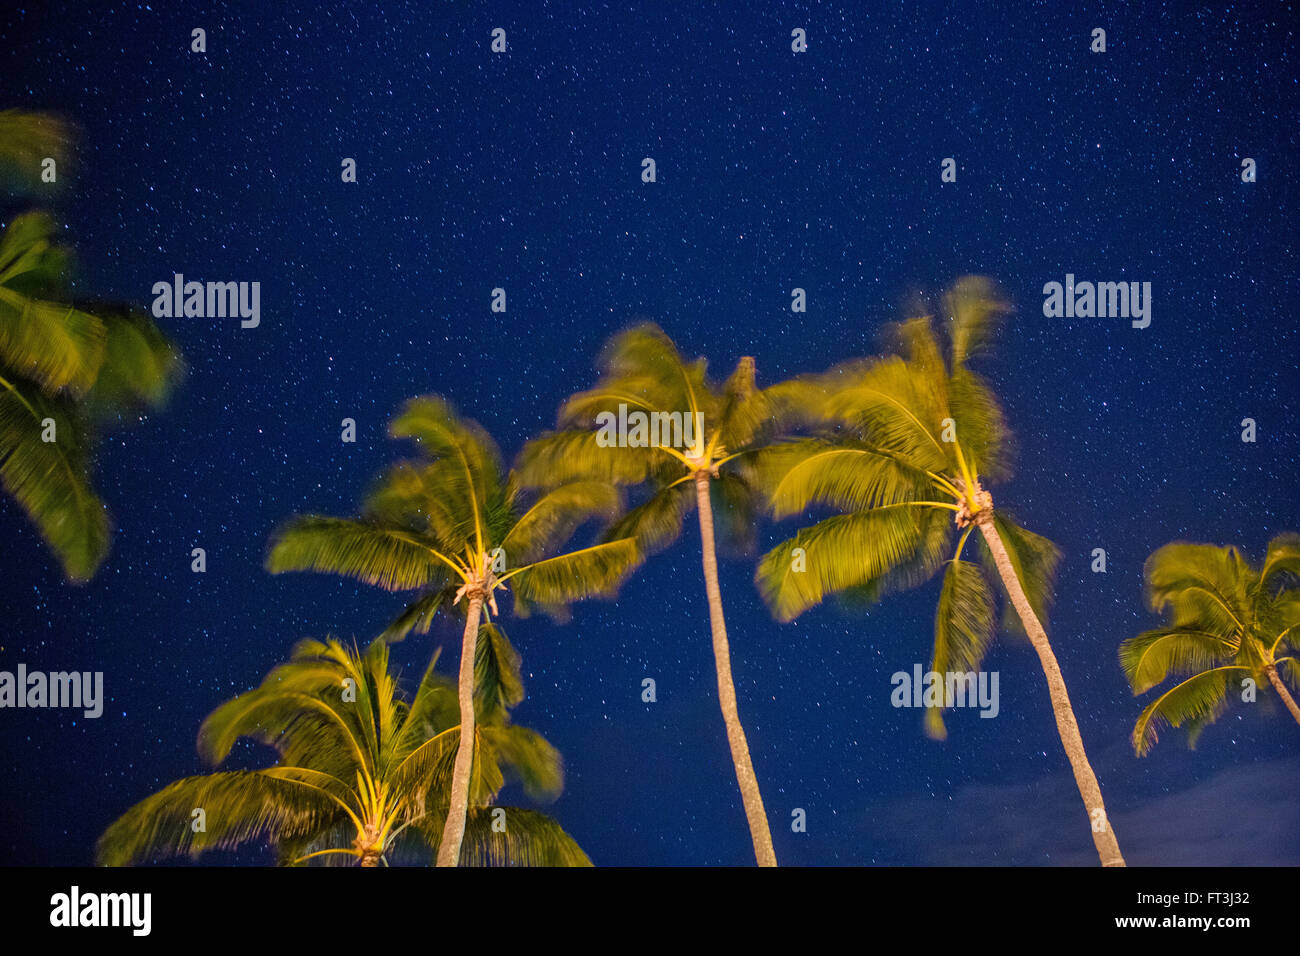 Starry night with palm trees blowing in the wind Stock Photo